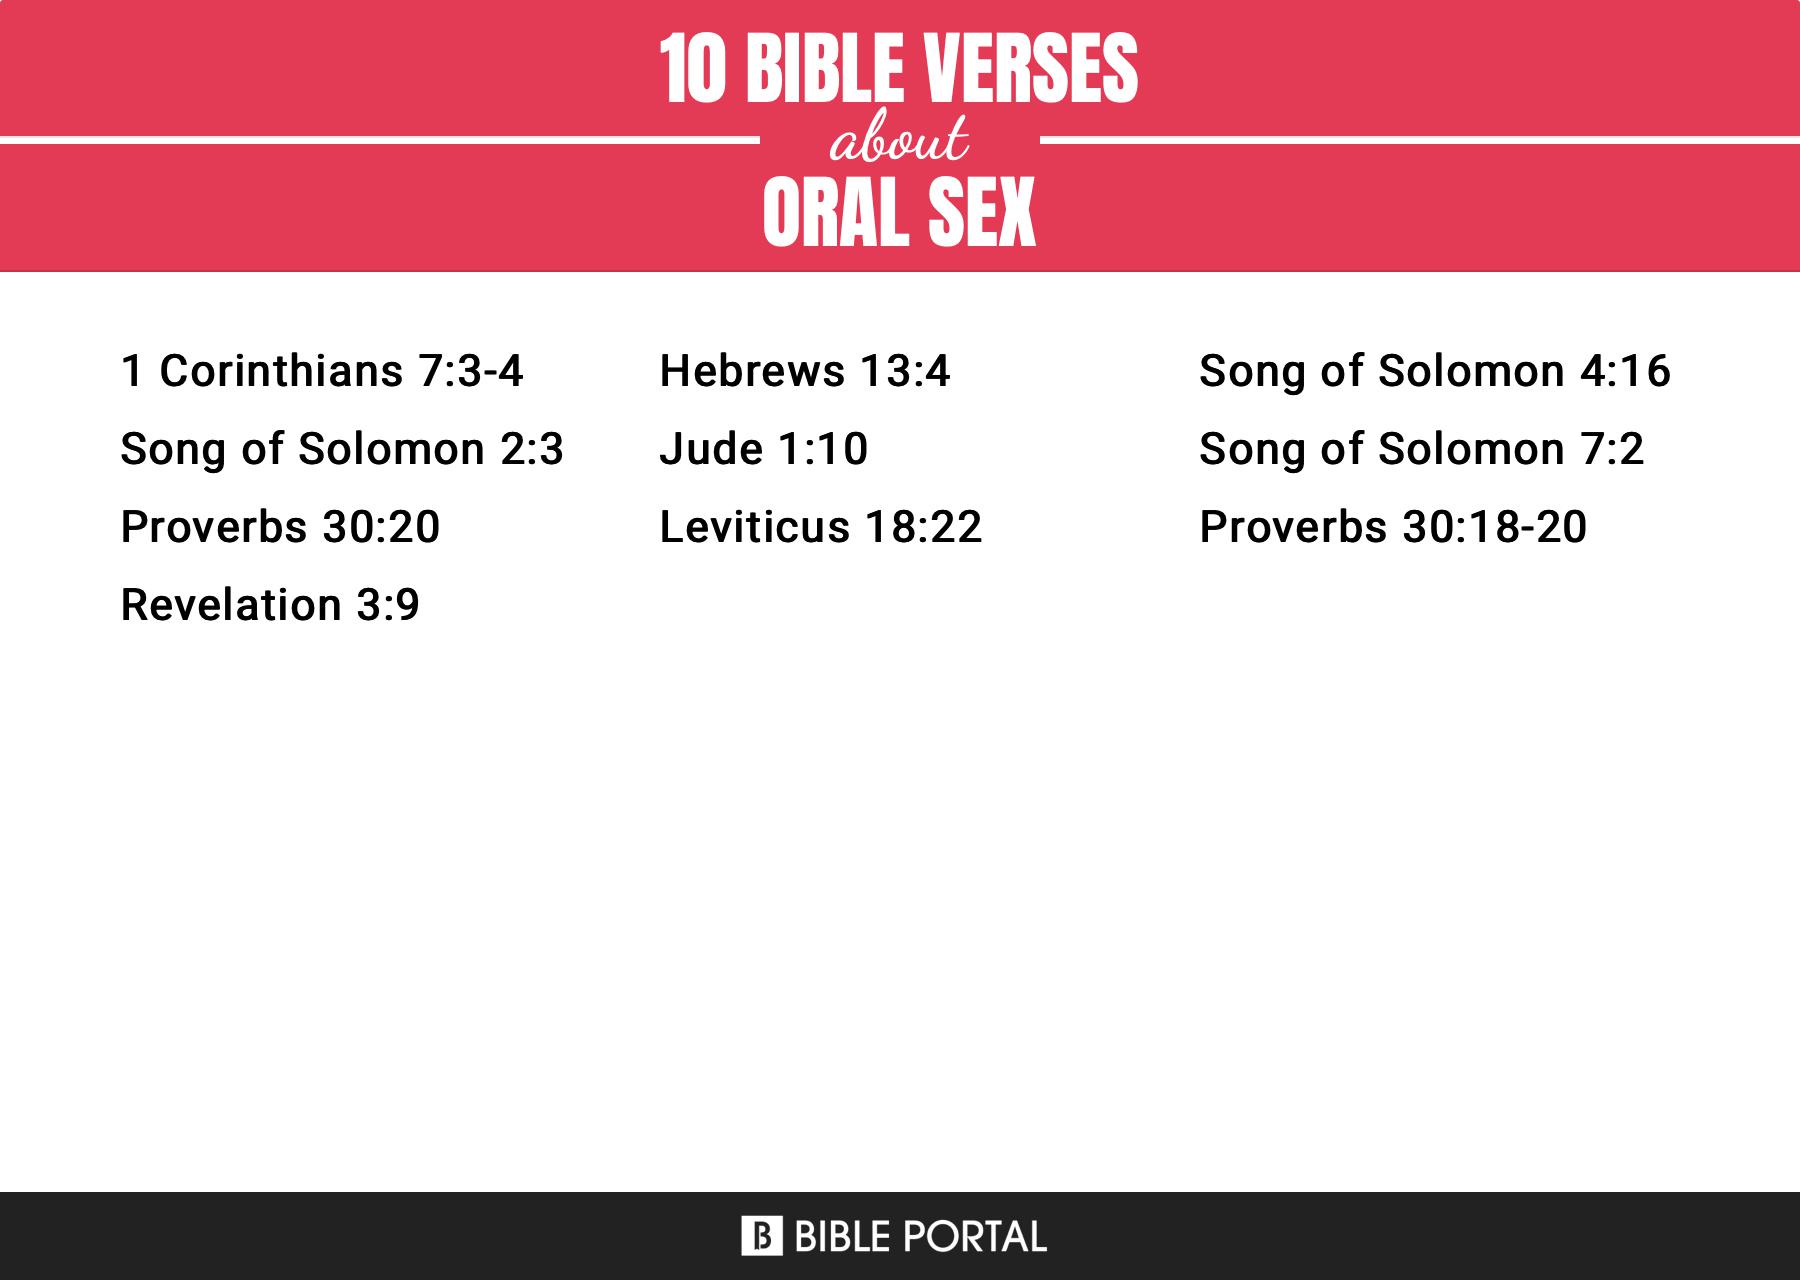 Bible Verses About Oral Sex